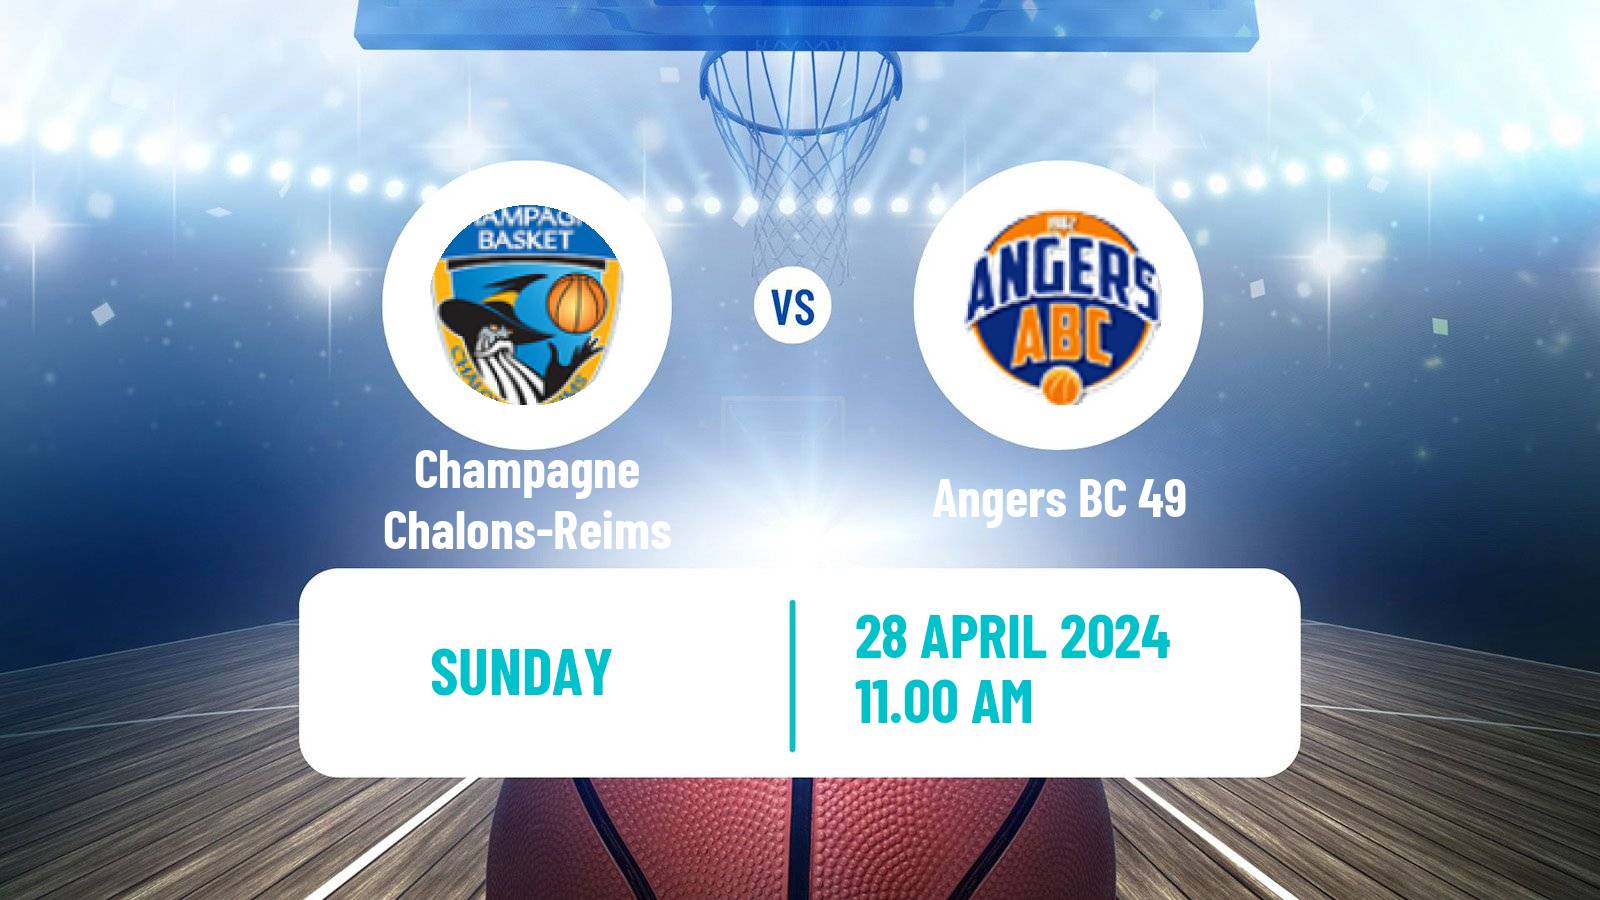 Basketball French LNB Pro B Champagne Chalons-Reims - Angers BC 49